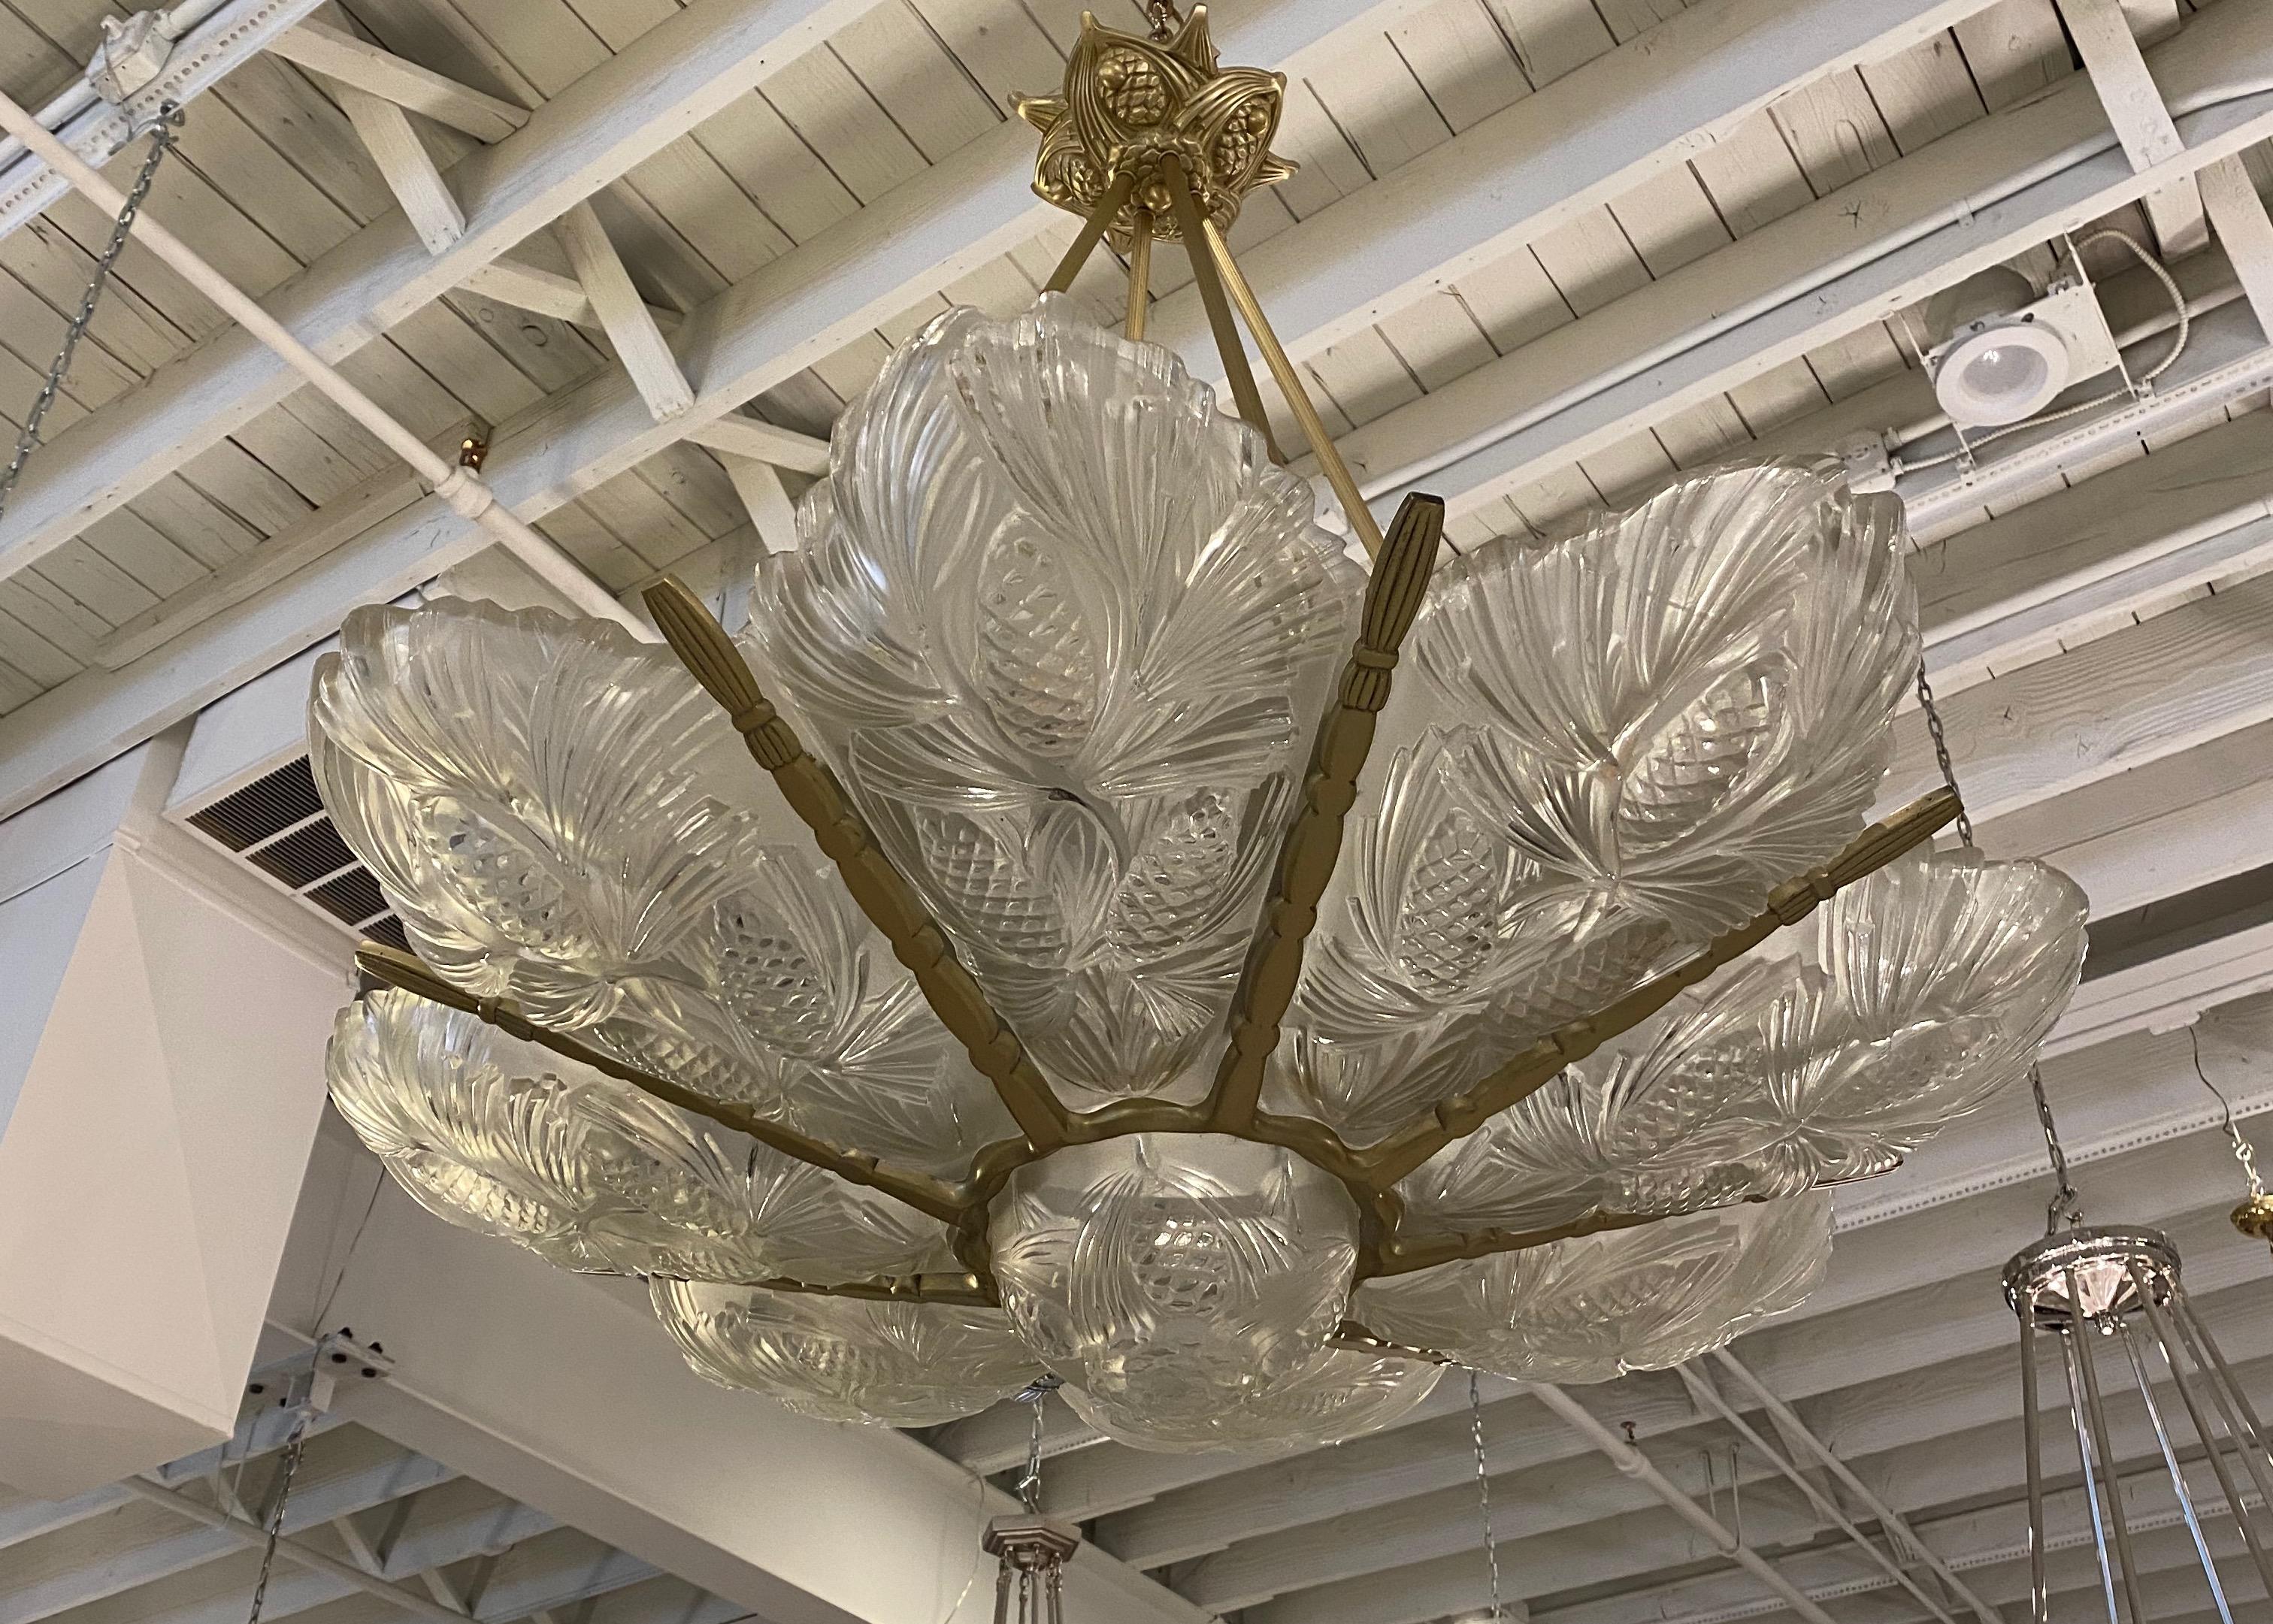 French Art Deco chandelier signed by famous artist Sabino. Having Eight outer panels and center bowl with pine cone motifs. The glass rest in a brass design frame. The pine cone motif continues on the ceiling plate. The chandelier has been fully